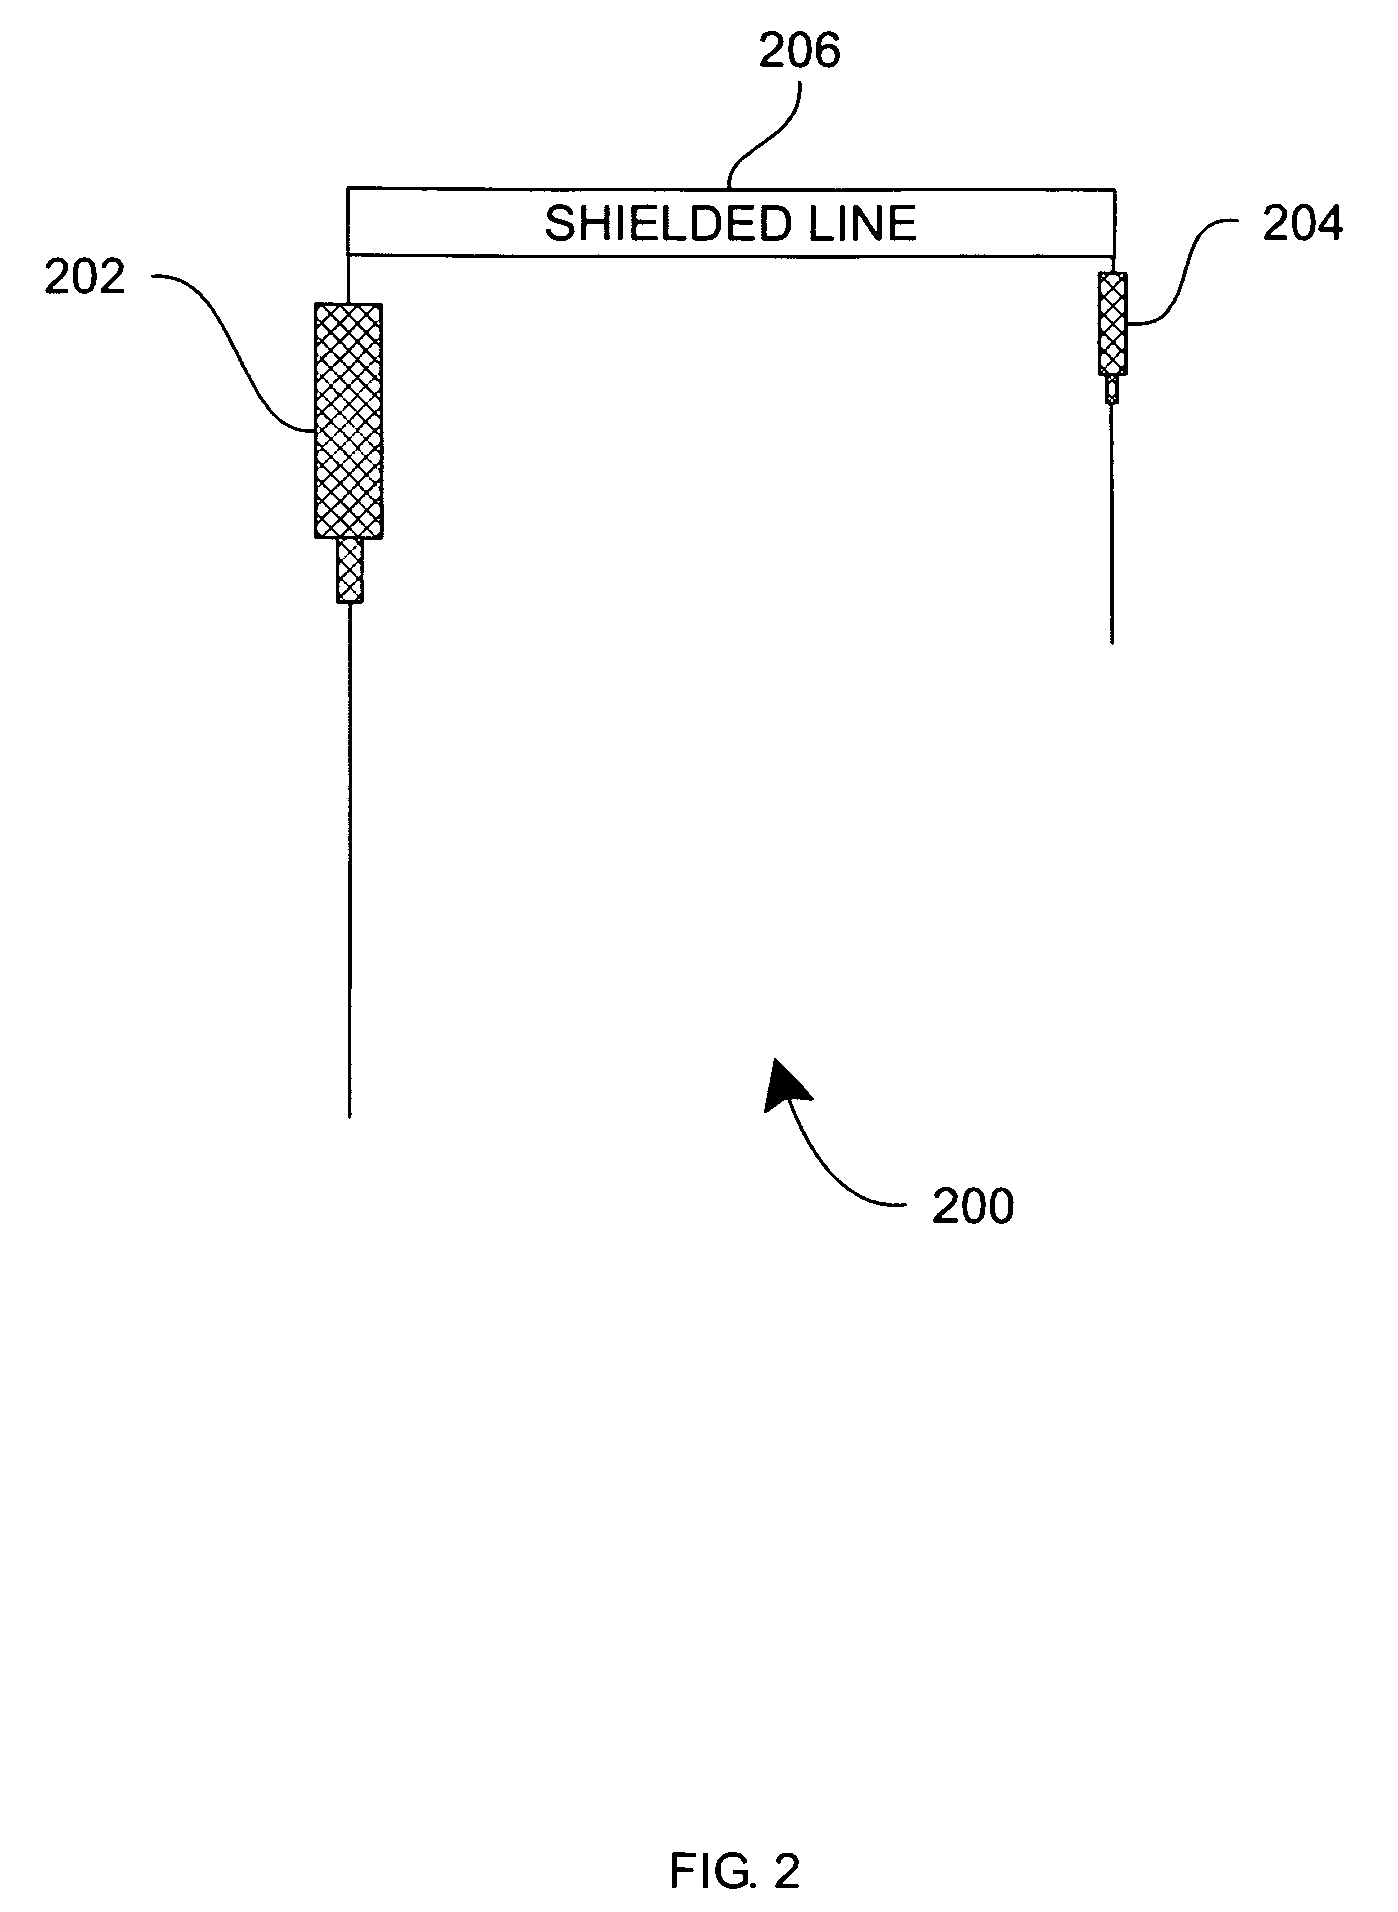 Systems, methods and apparatus for preparation, delivery and monitoring of radioisotopes in positron emission tomography